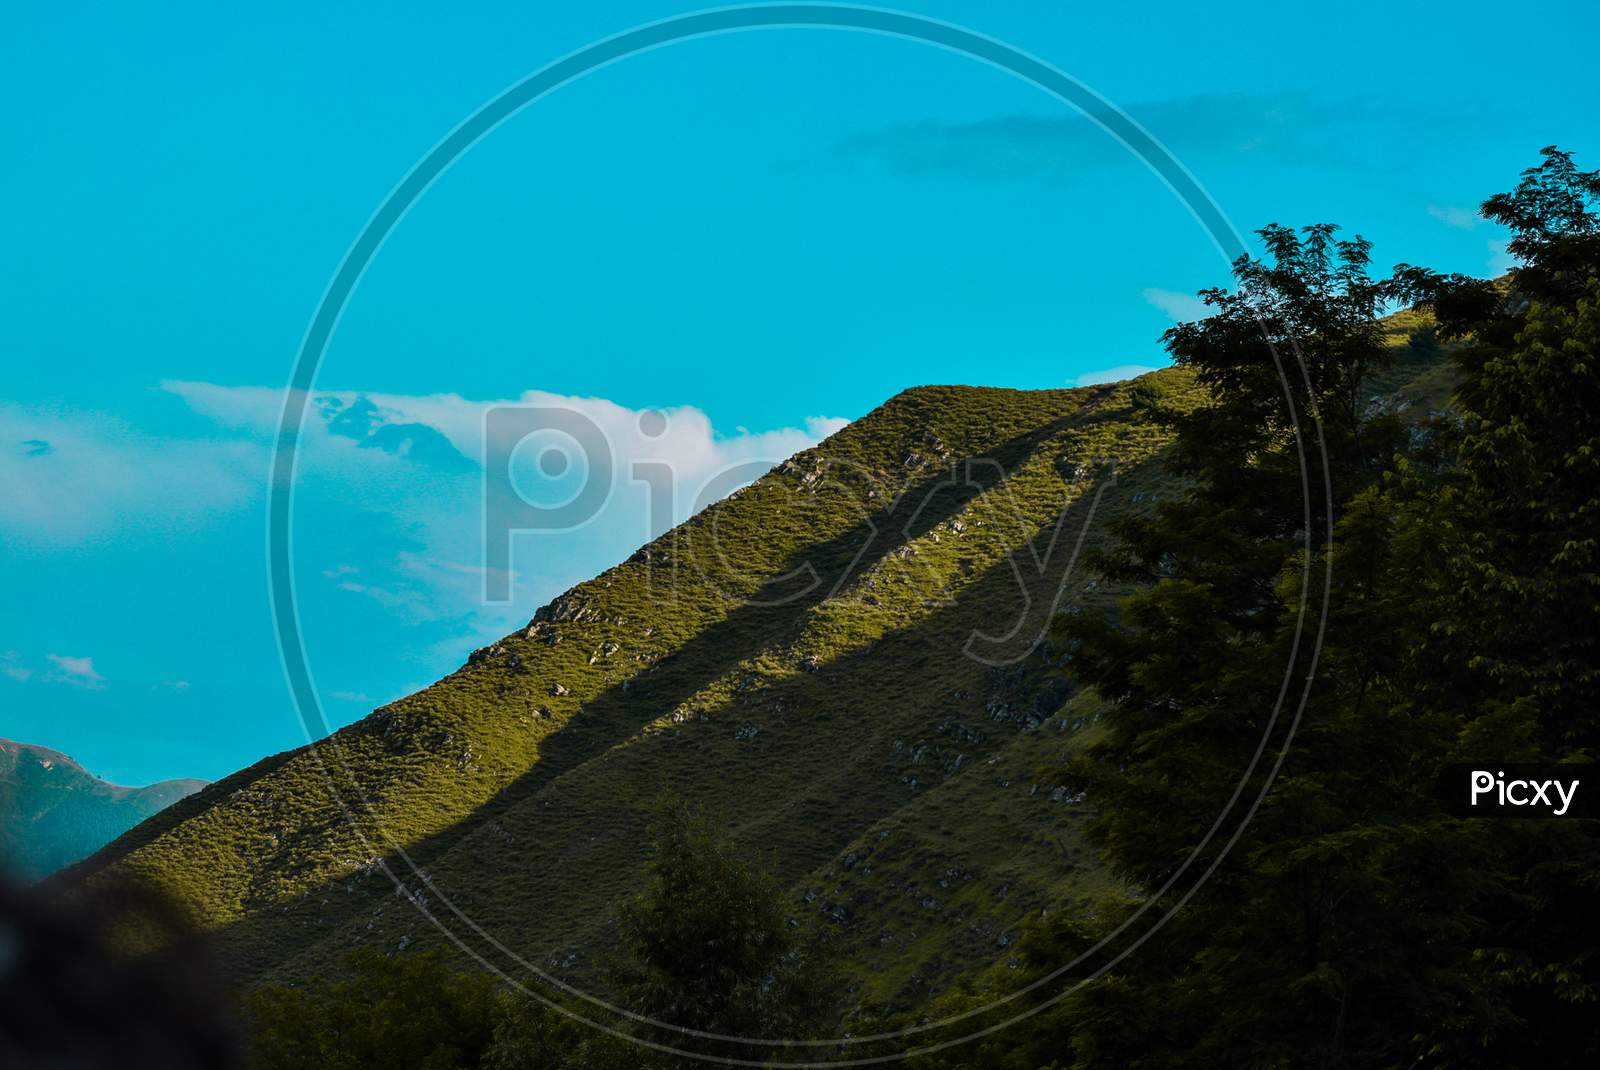 Landscape Of Mountain And The Sky